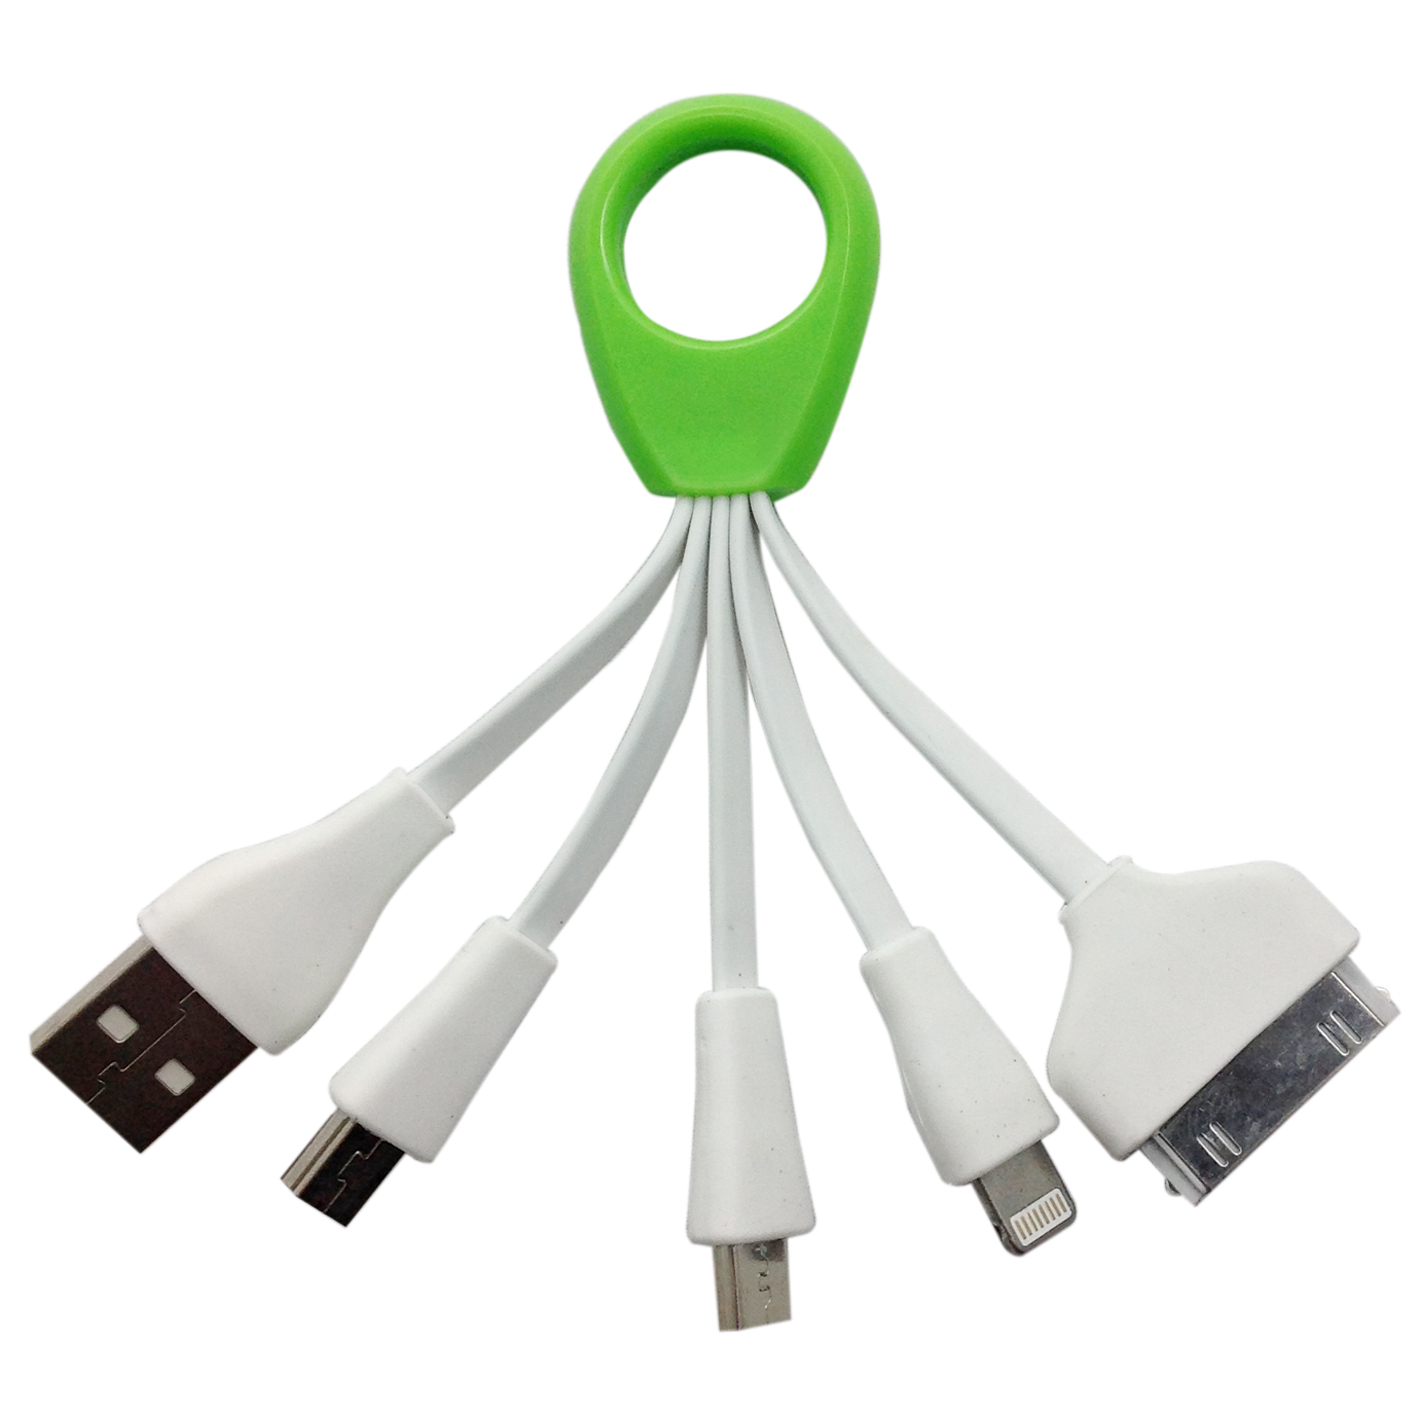 Indian Elephants Red Pattern Multi USB Retractable Charging Cable,Multiple Charger Cord Adapter for Tablets Android Phone Universal Use